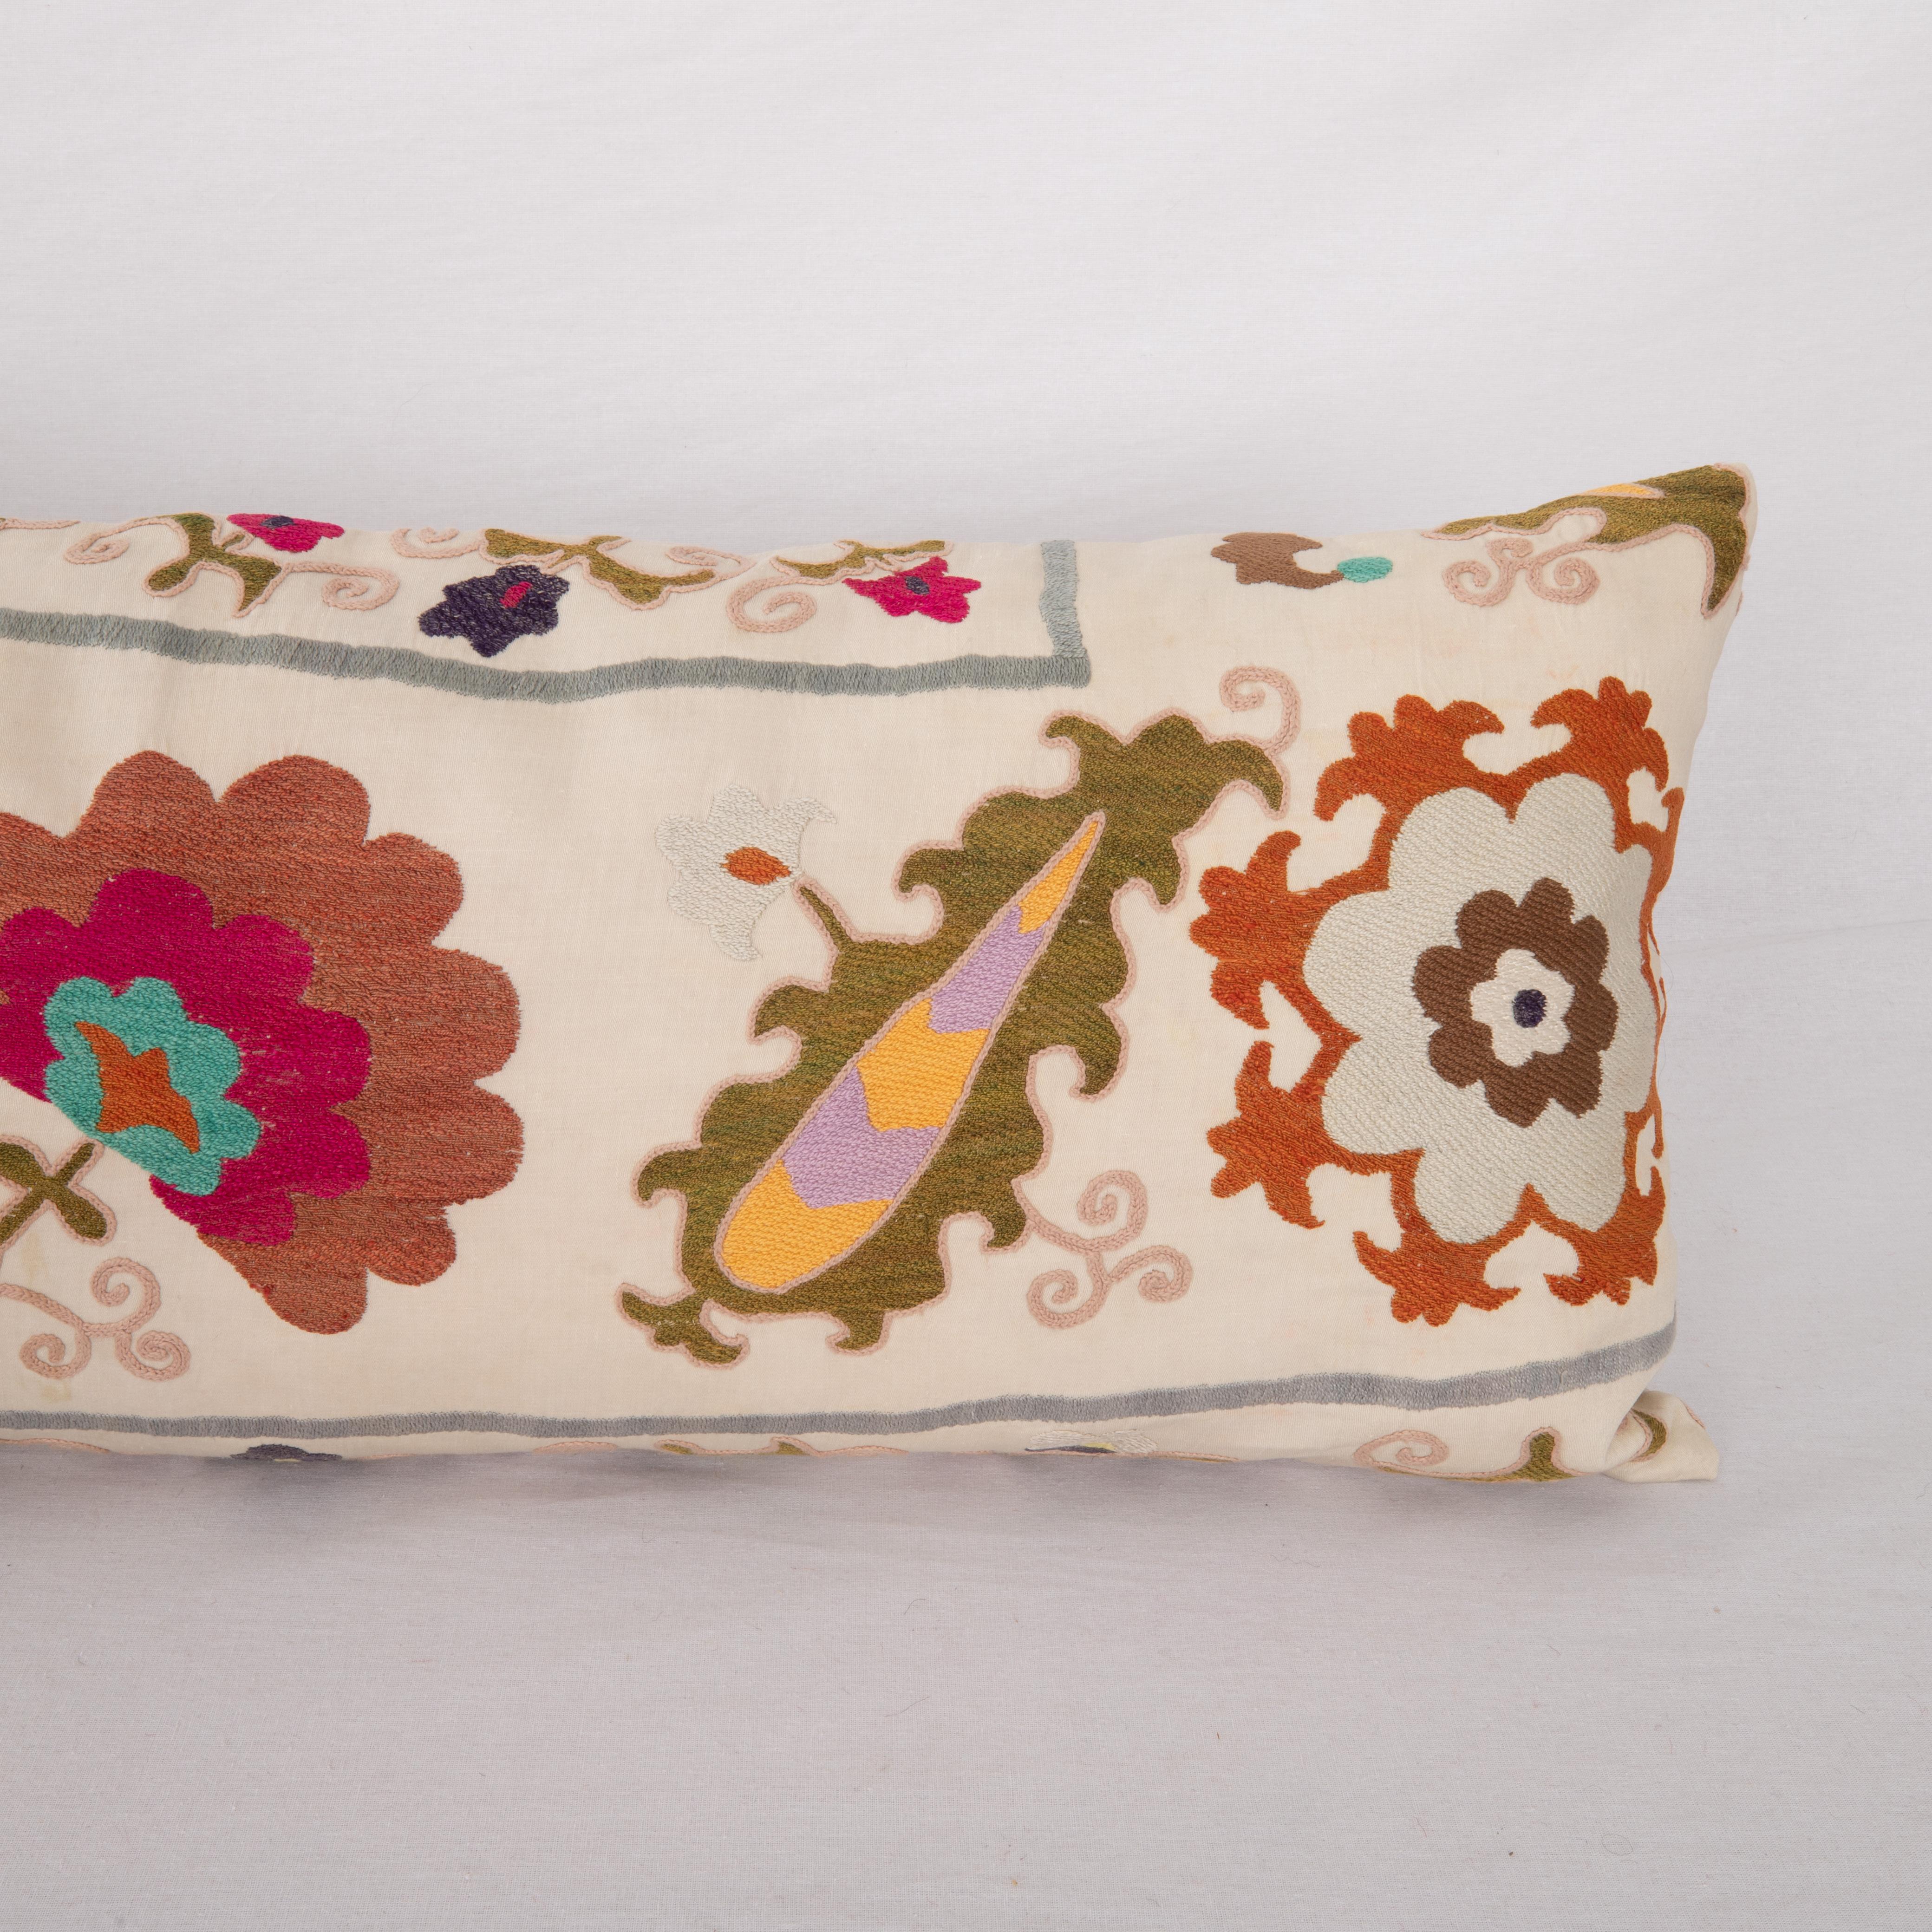 Embroidered Suzani Pillow Case Made from a Vintage Suzani, 1970s For Sale